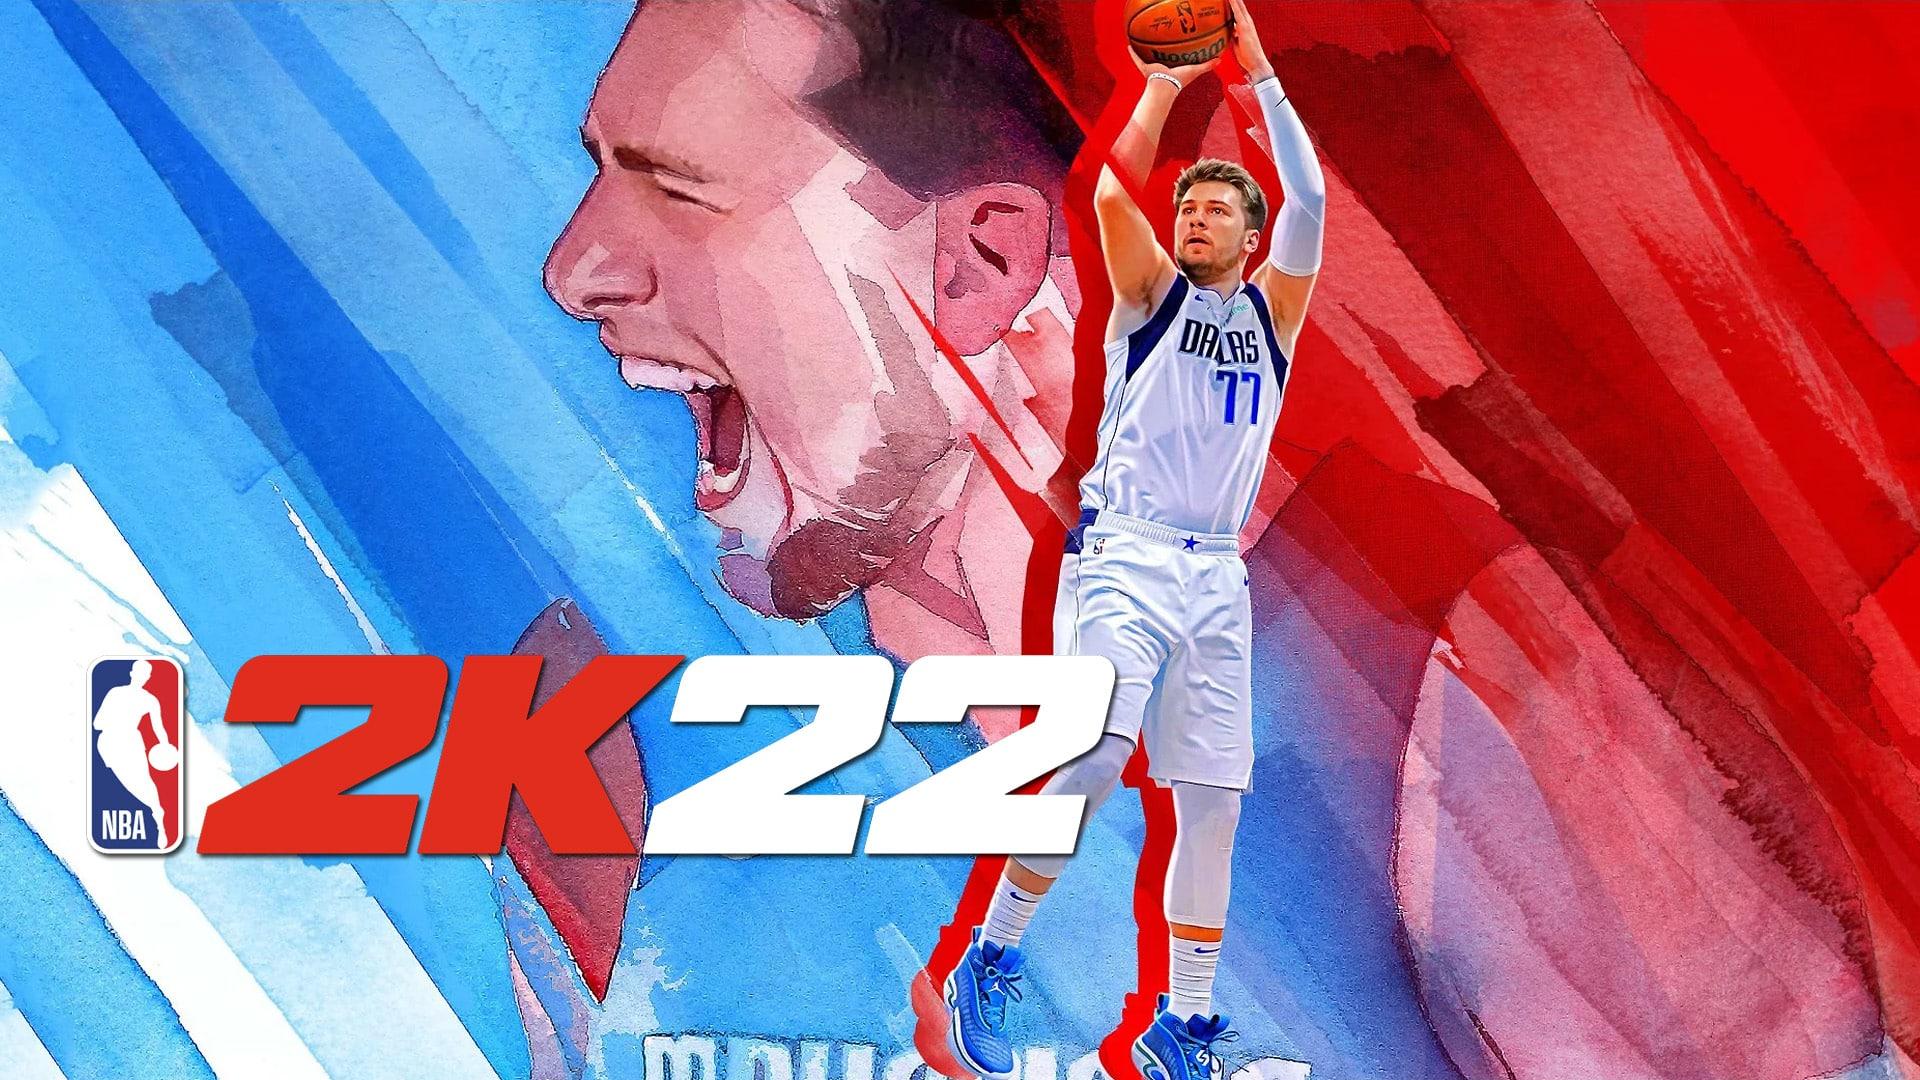 Luka Doncic as the cover athlete NBA 2K22